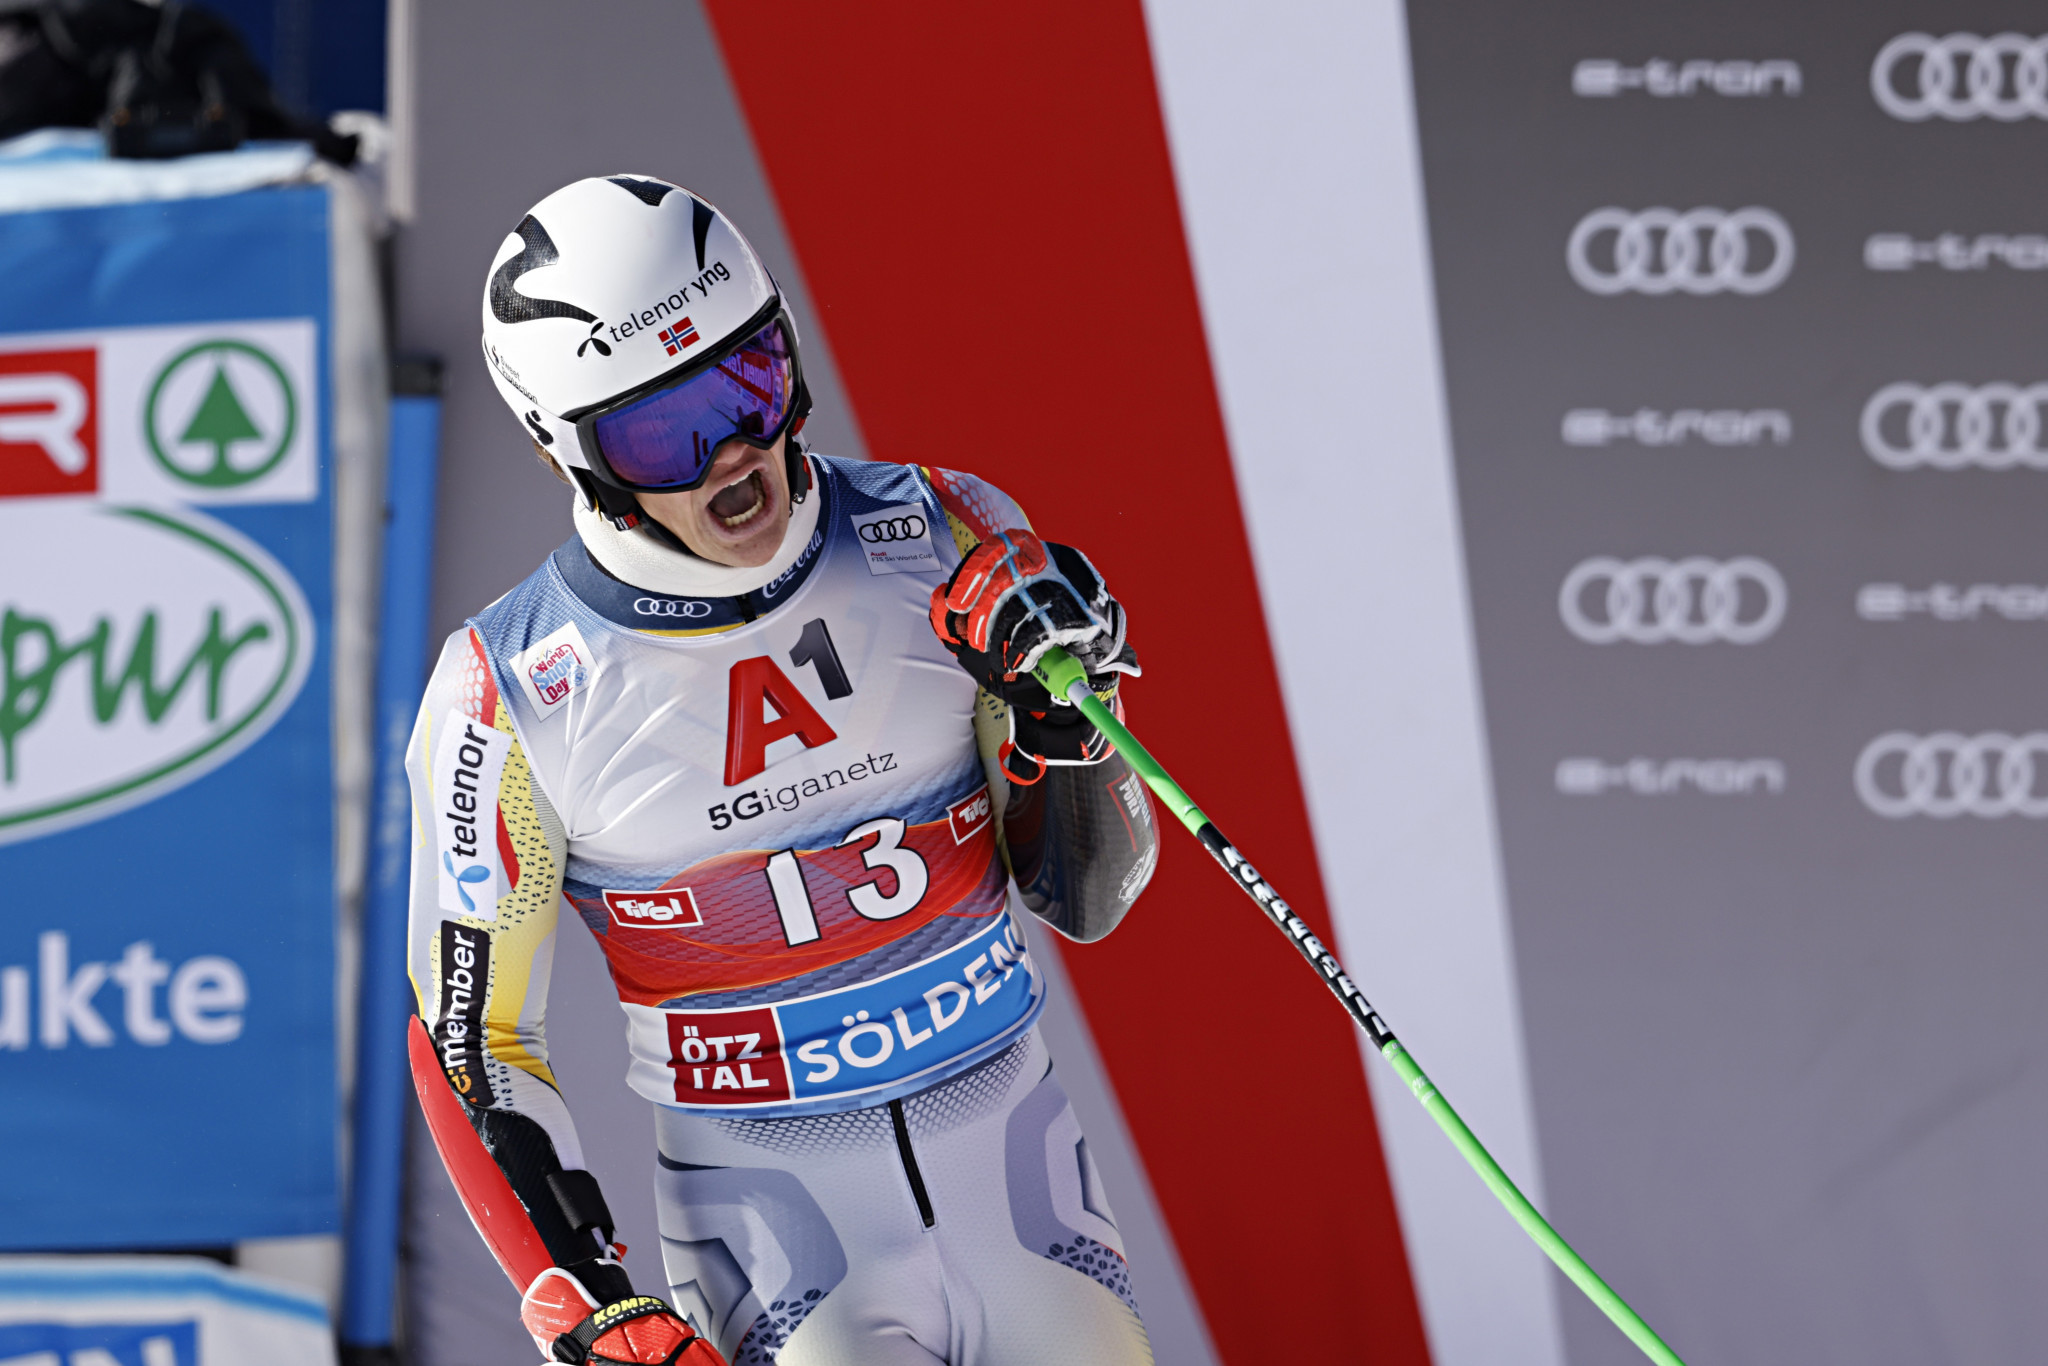 Lucas Braathen, who triumphed in Sölden last season, has overcome a major knee injury to be fit for the start of the new FIS Alpine Ski World Cup campaign ©Getty Images